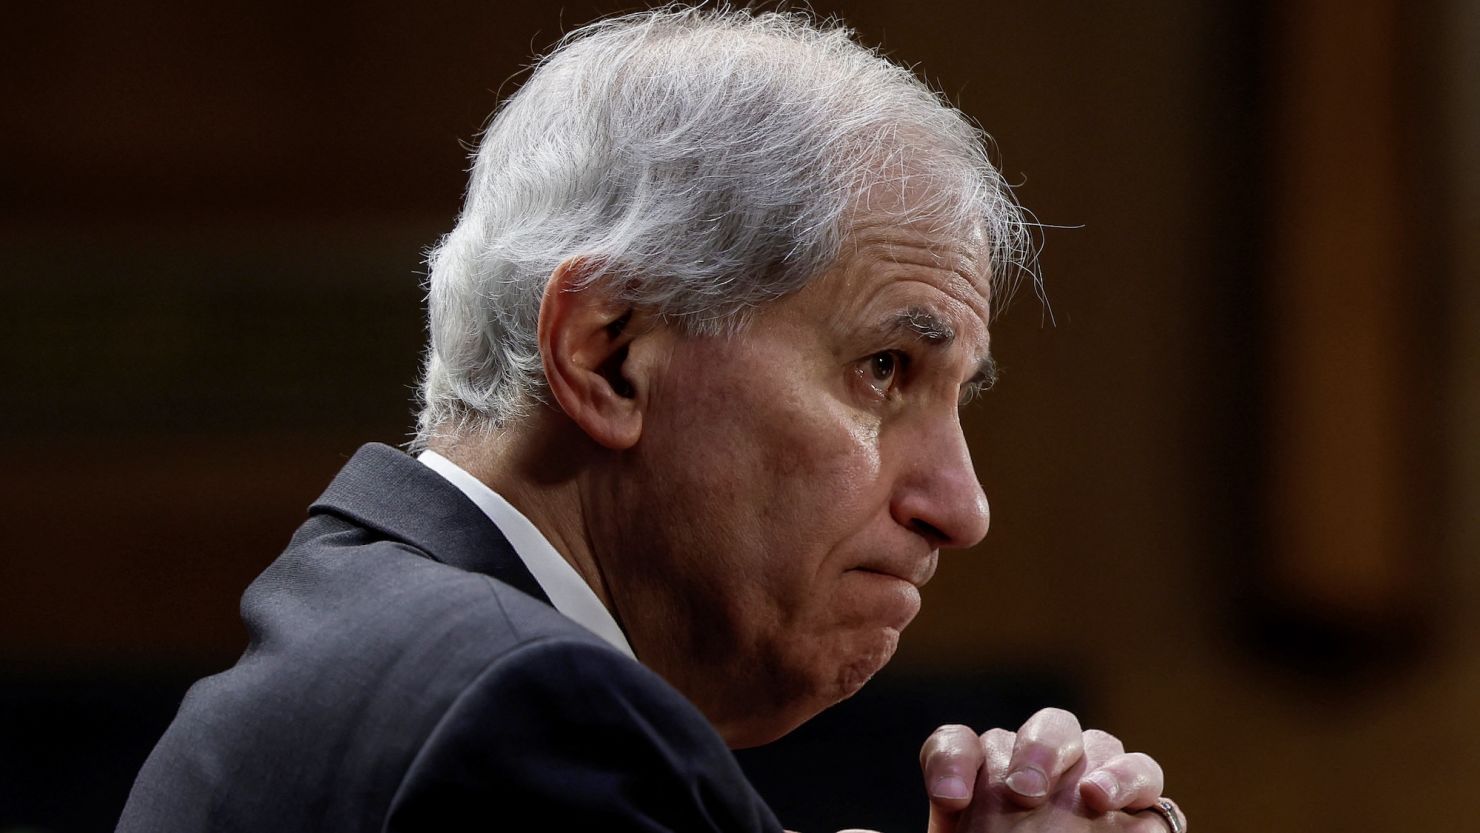 Federal Deposit Insurance Corporation Chairman Martin J. Gruenberg testifies at a Senate Banking, Housing and Urban Affairs Committee hearing on "Recent Bank Failures and the Federal Regulatory Response" on Capitol Hill in Washington, U.S., March 28, 2023.